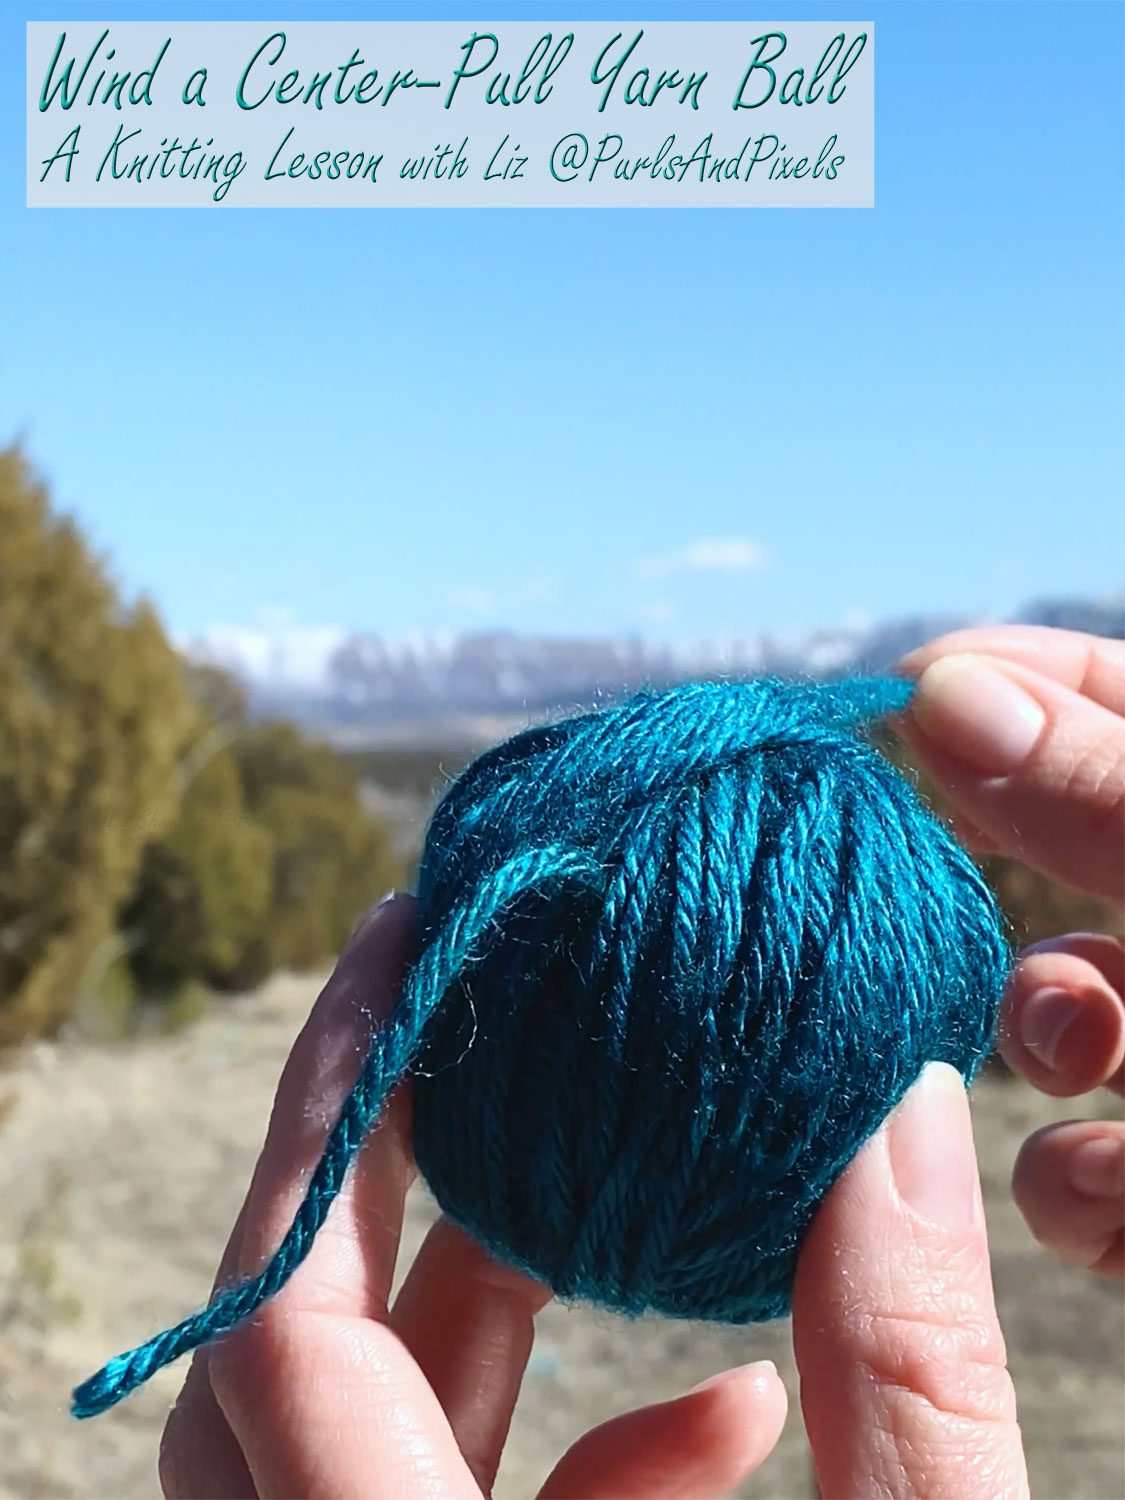 How to Wind a Center-Pull Yarn Ball